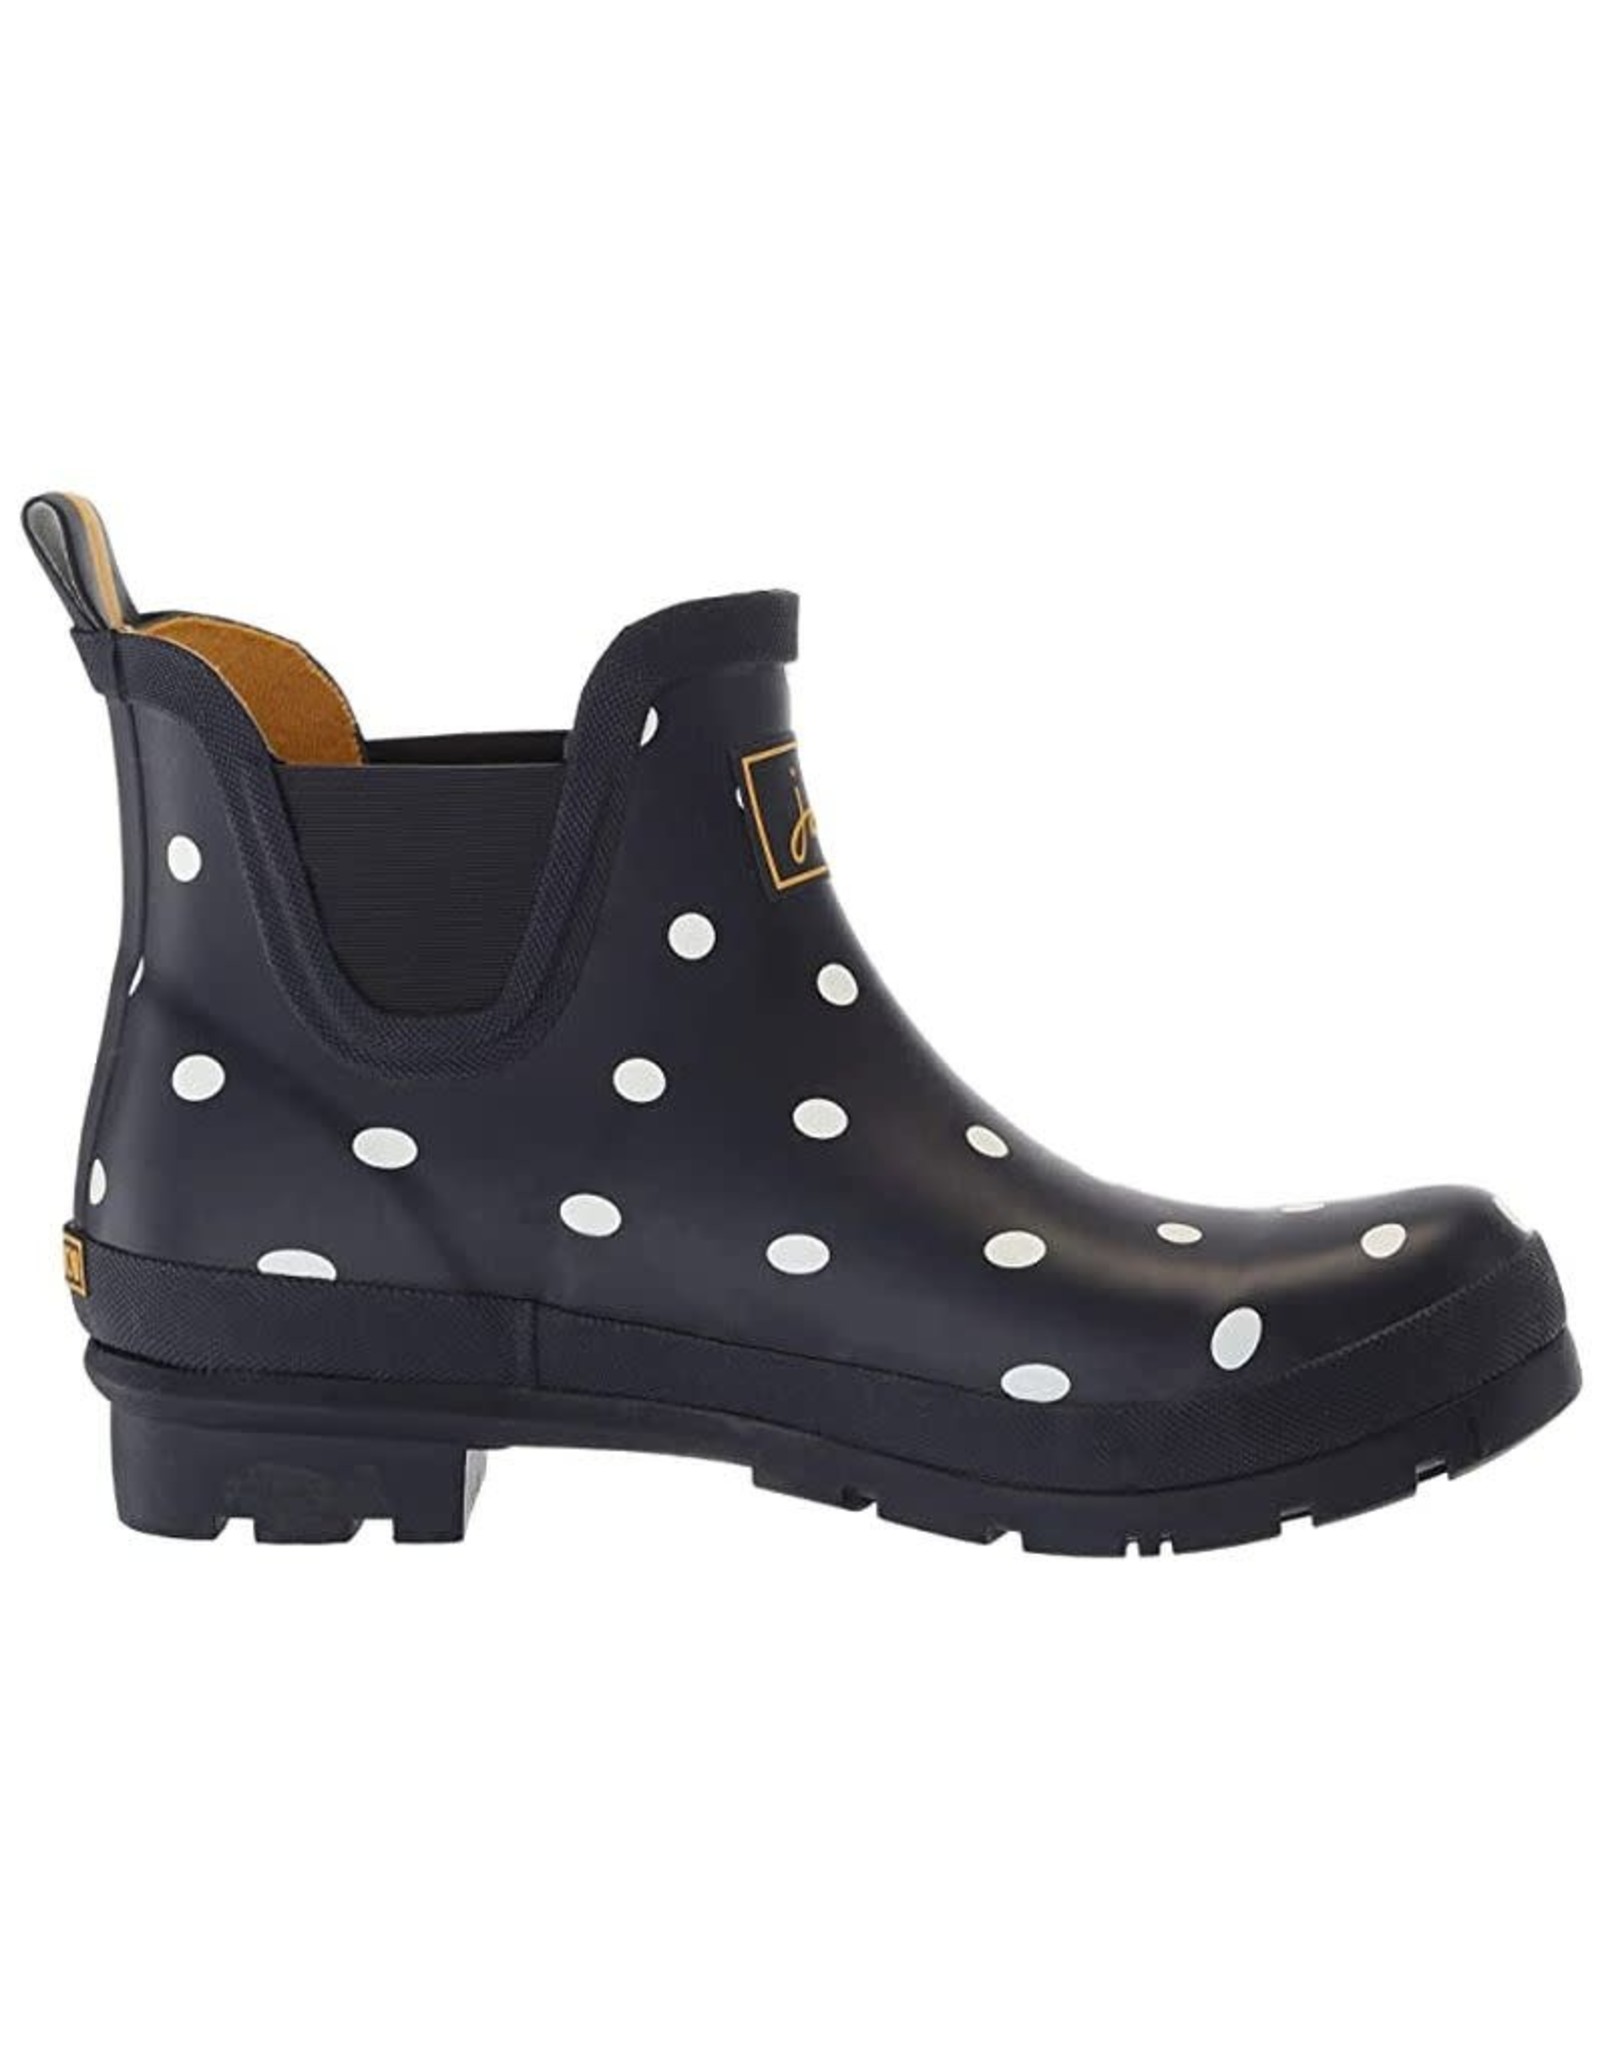 Joules Joules - Wellies Short